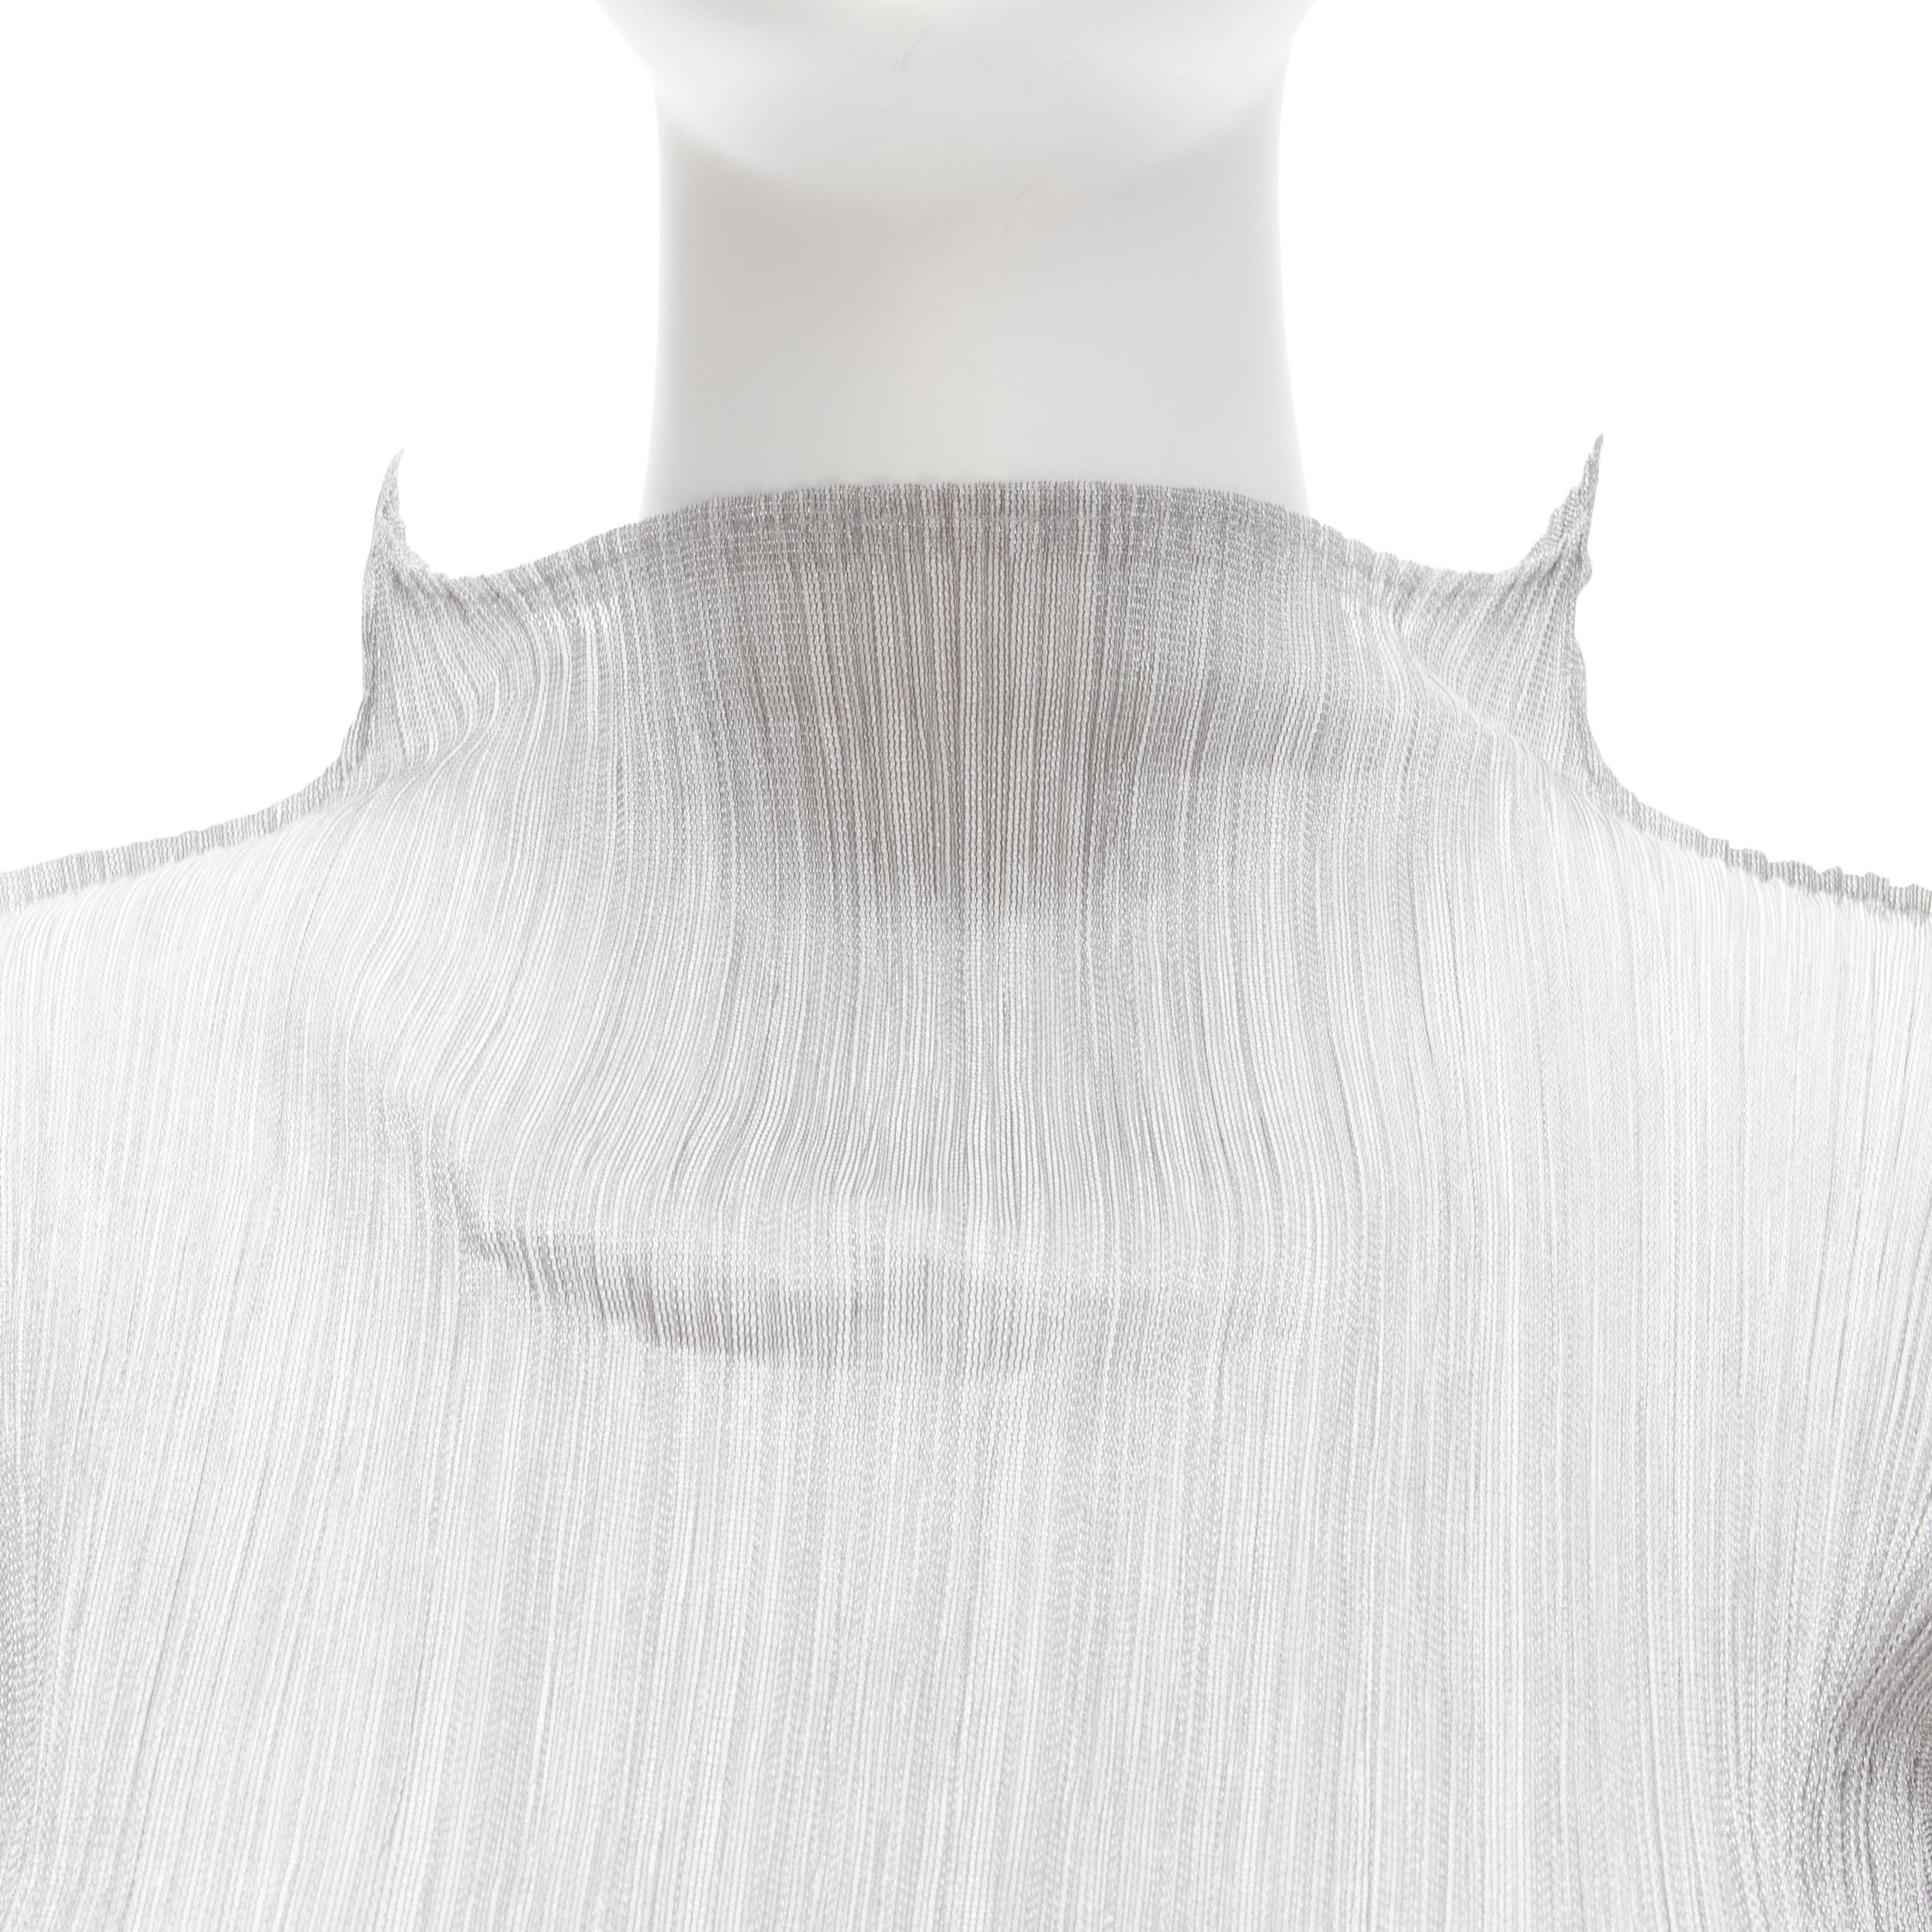 ISSEY MIYAKE PLEATS PLEASE silver spike collar angular cut pleats top JP3 L
Reference: TGAS/D00302
Brand: Issey Miyake
Collection: Pleats Please
Material: Polyester
Color: Silver
Pattern: Solid
Closure: Pullover
Made in: Japan

CONDITION:
Condition: